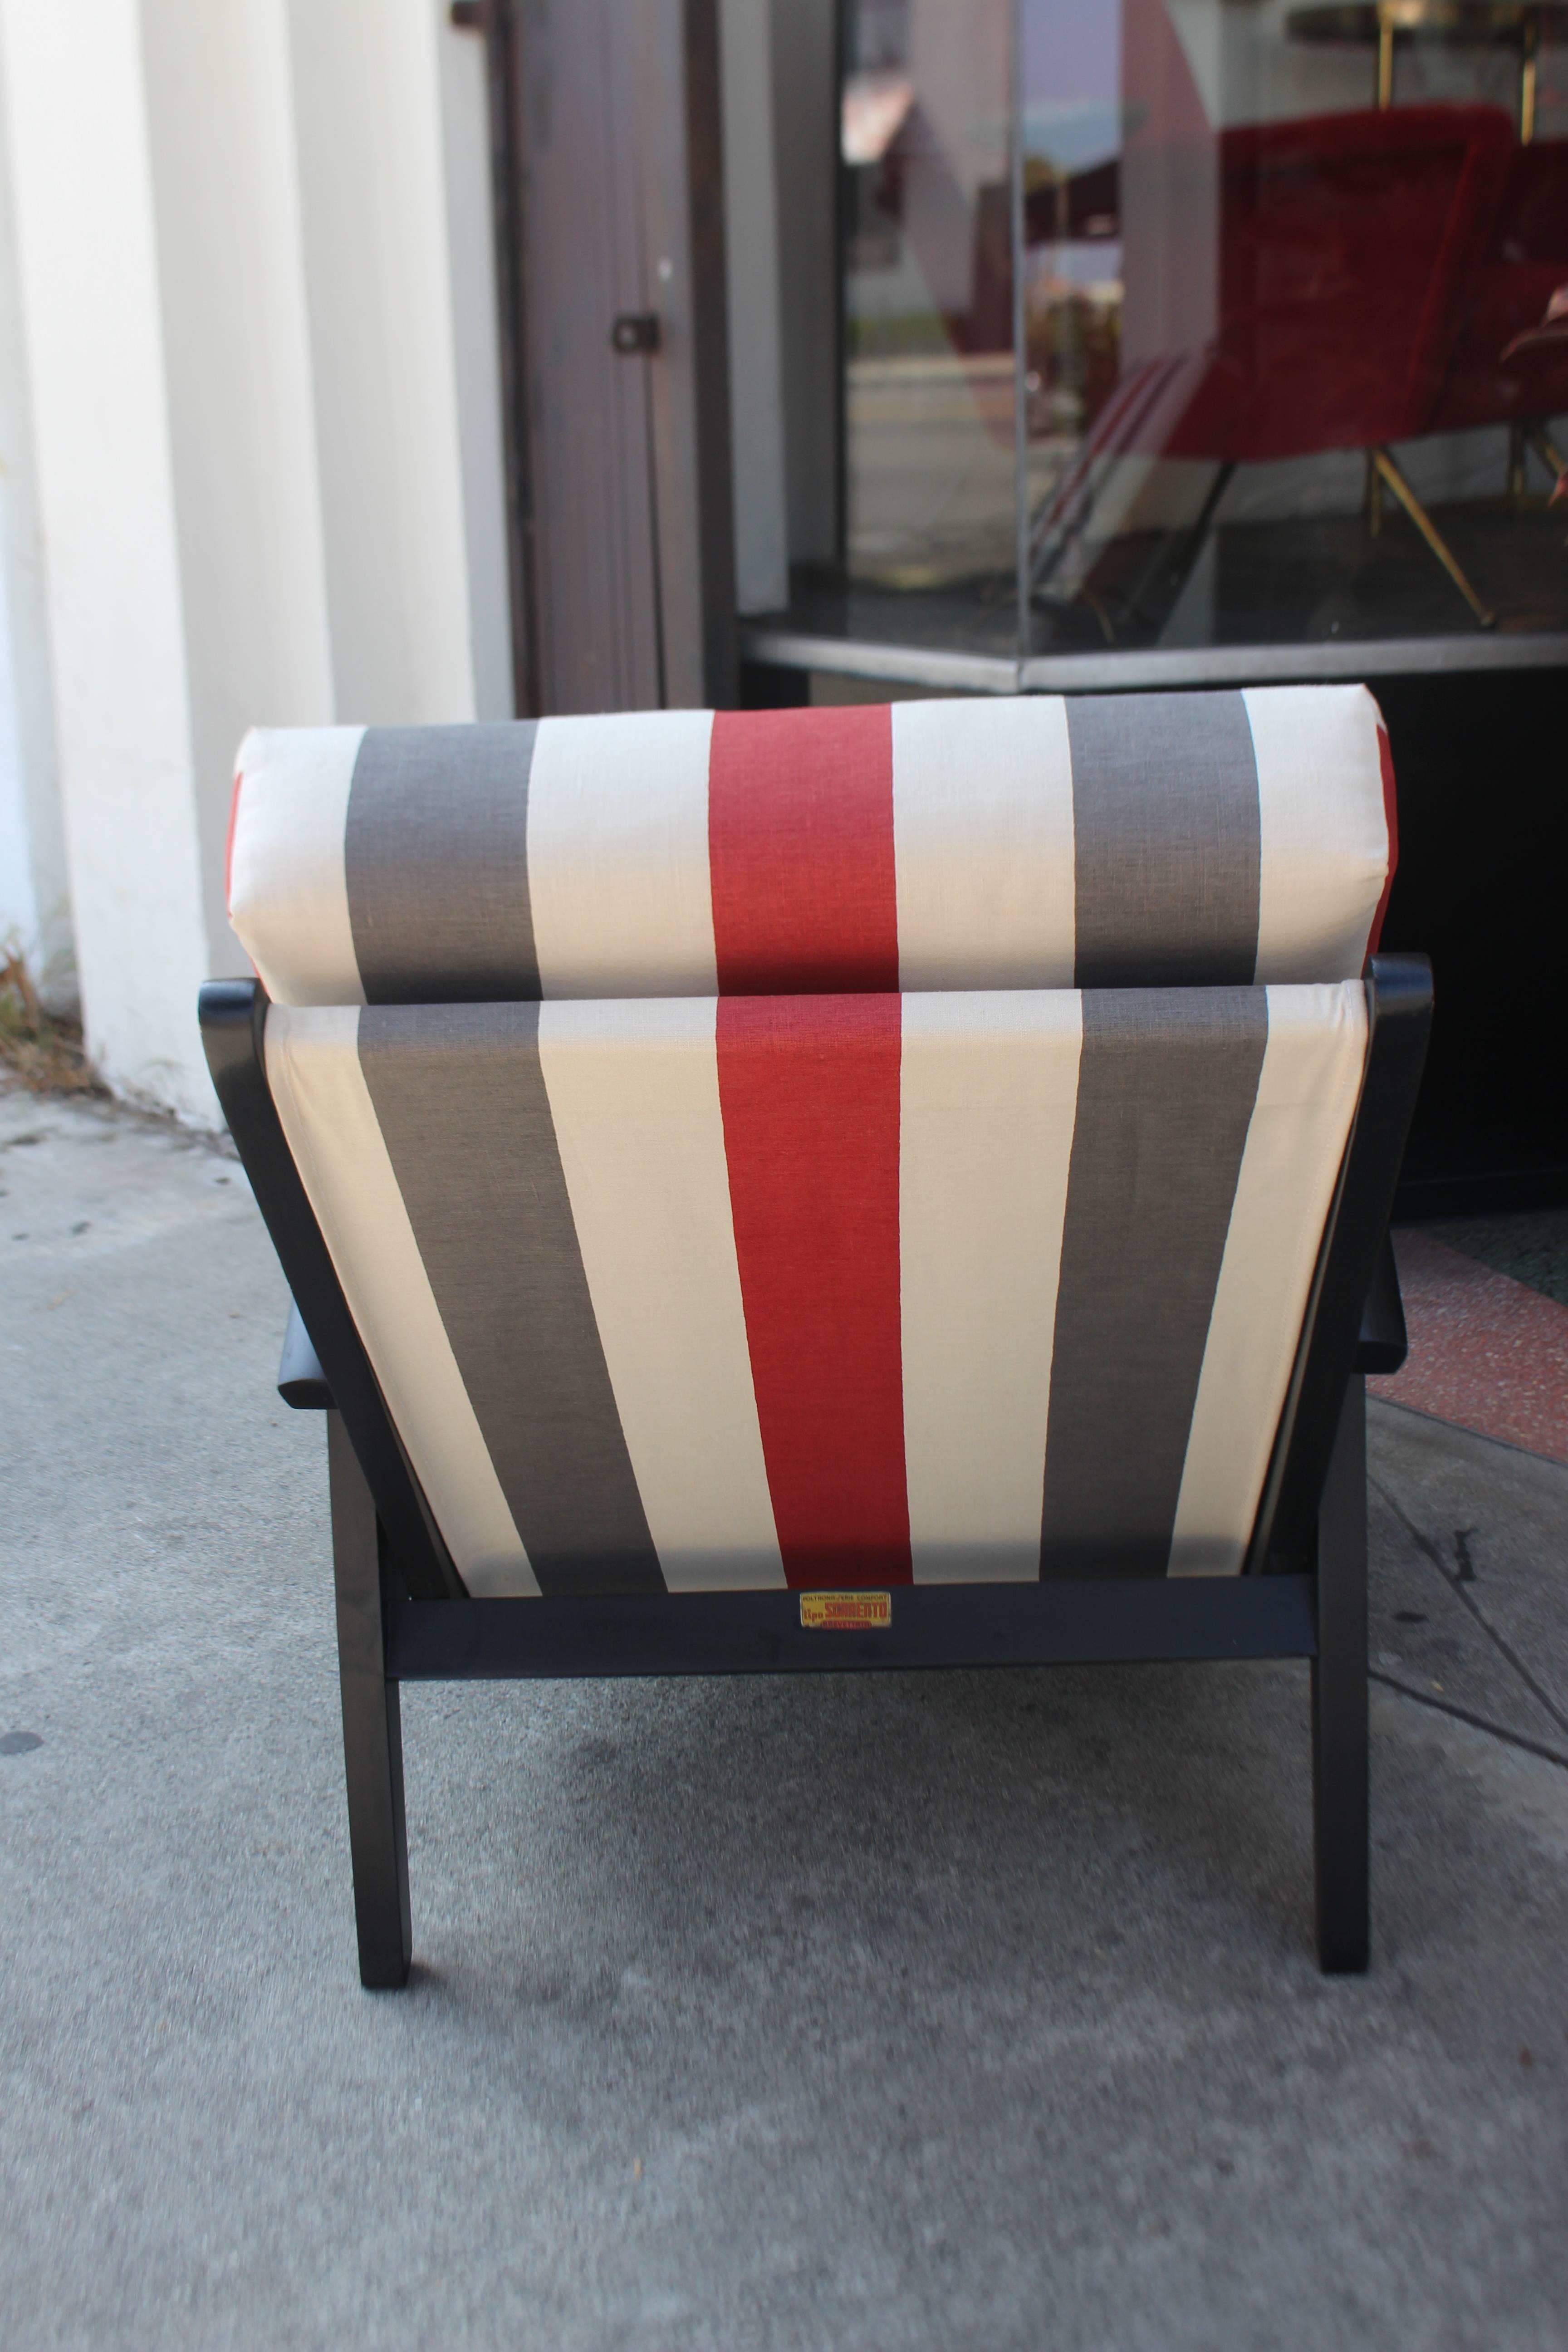 1960s Italian pair of recliner chairs for the deck at the Sorrento hotel in Capri. Chairs are refurbished and reupholster. 
Photo showing the label for Cerutti di Ugo D'Alessio & C.
Continental US In-Home Delivery  1 - 3 Weeks $450